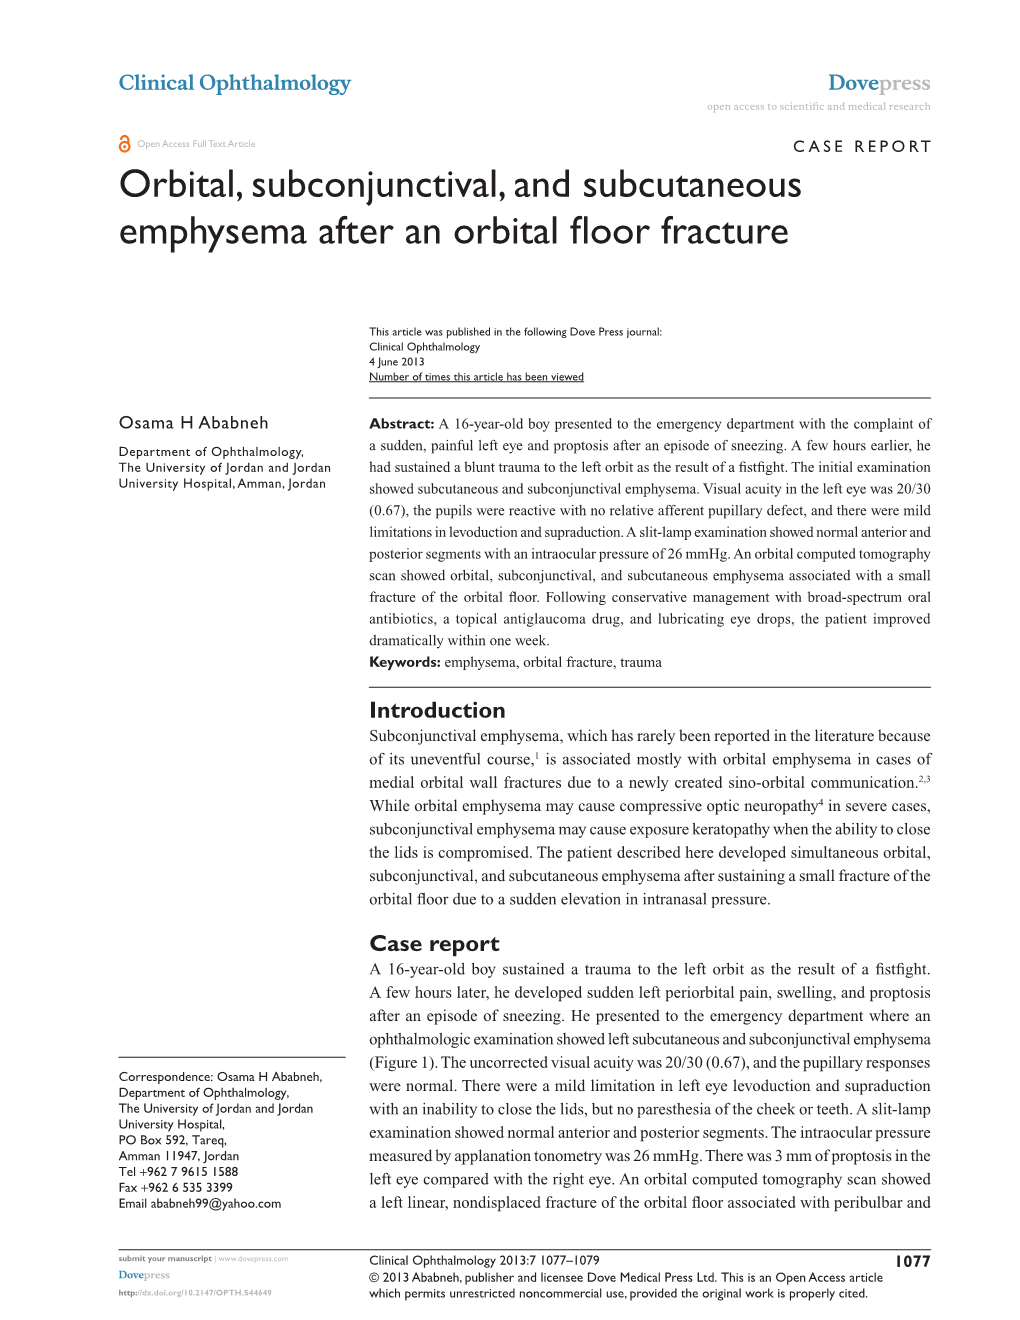 Orbital, Subconjunctival, and Subcutaneous Emphysema After an Orbital Floor Fracture